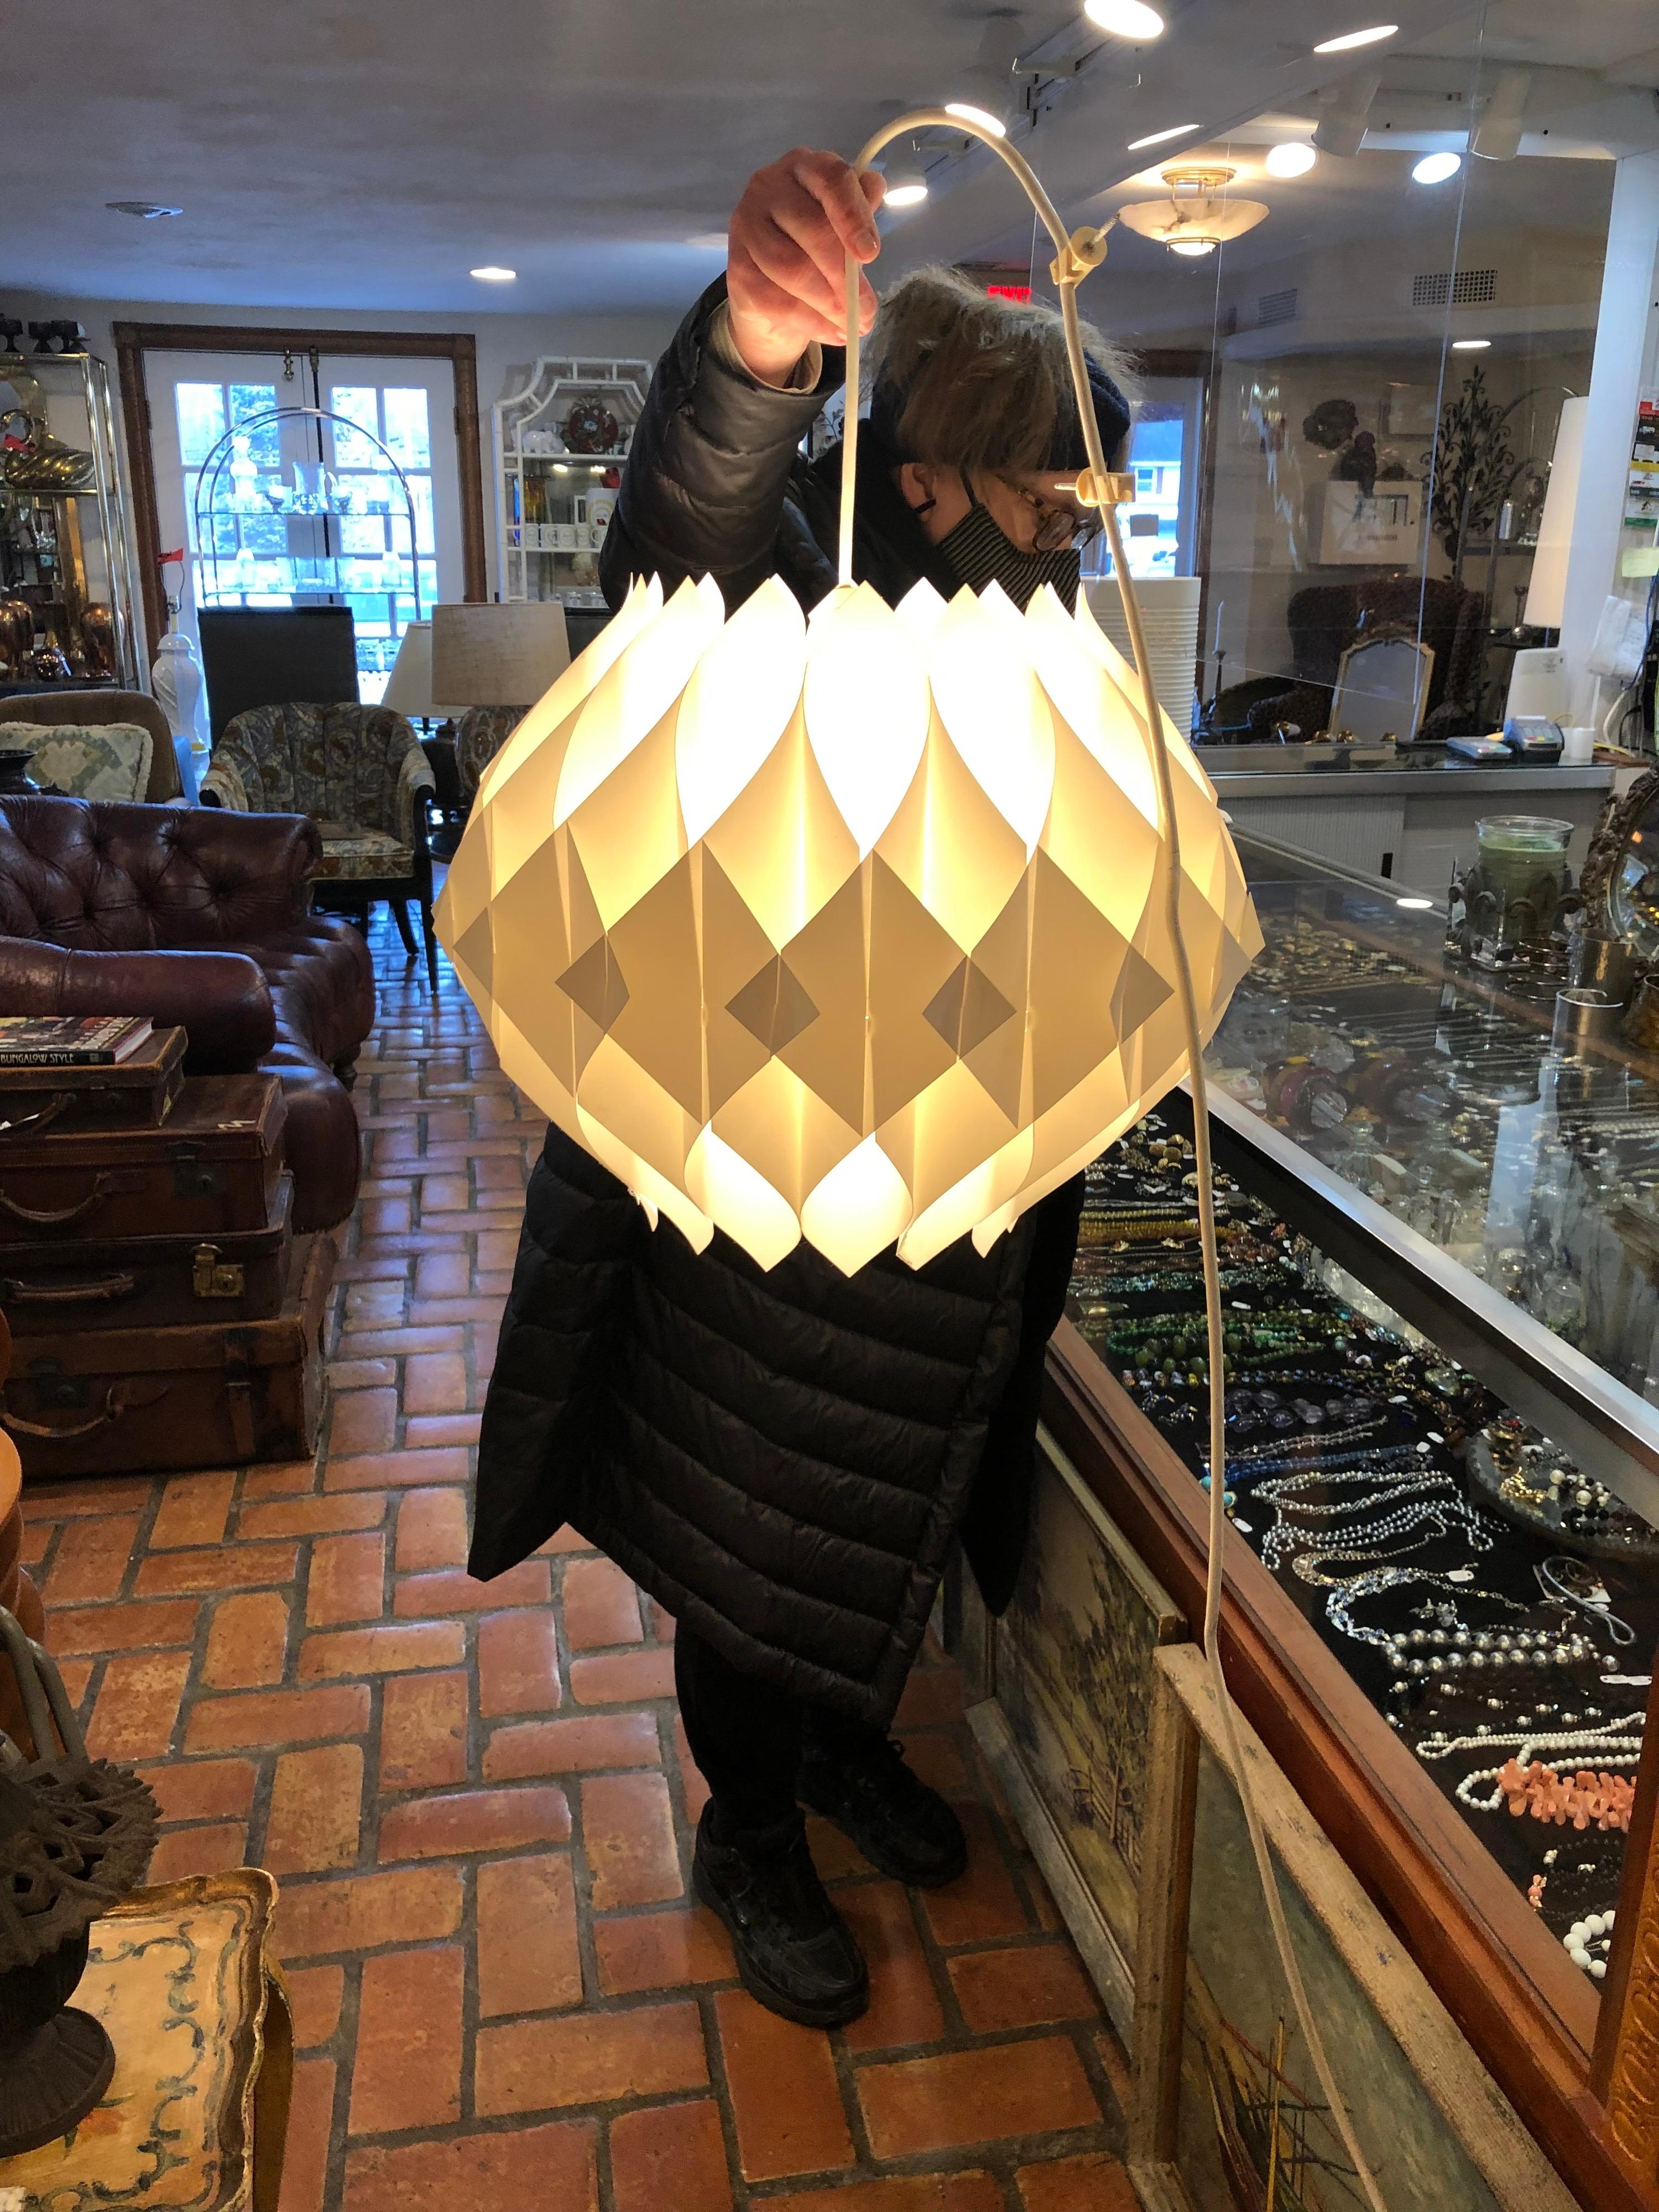 Le Klint Honeycomb Chandelier. Original vintage condition. in white. Geometric designs with amazing light refractions. Perfect for that mid century home. This item can parcel ship very economically.